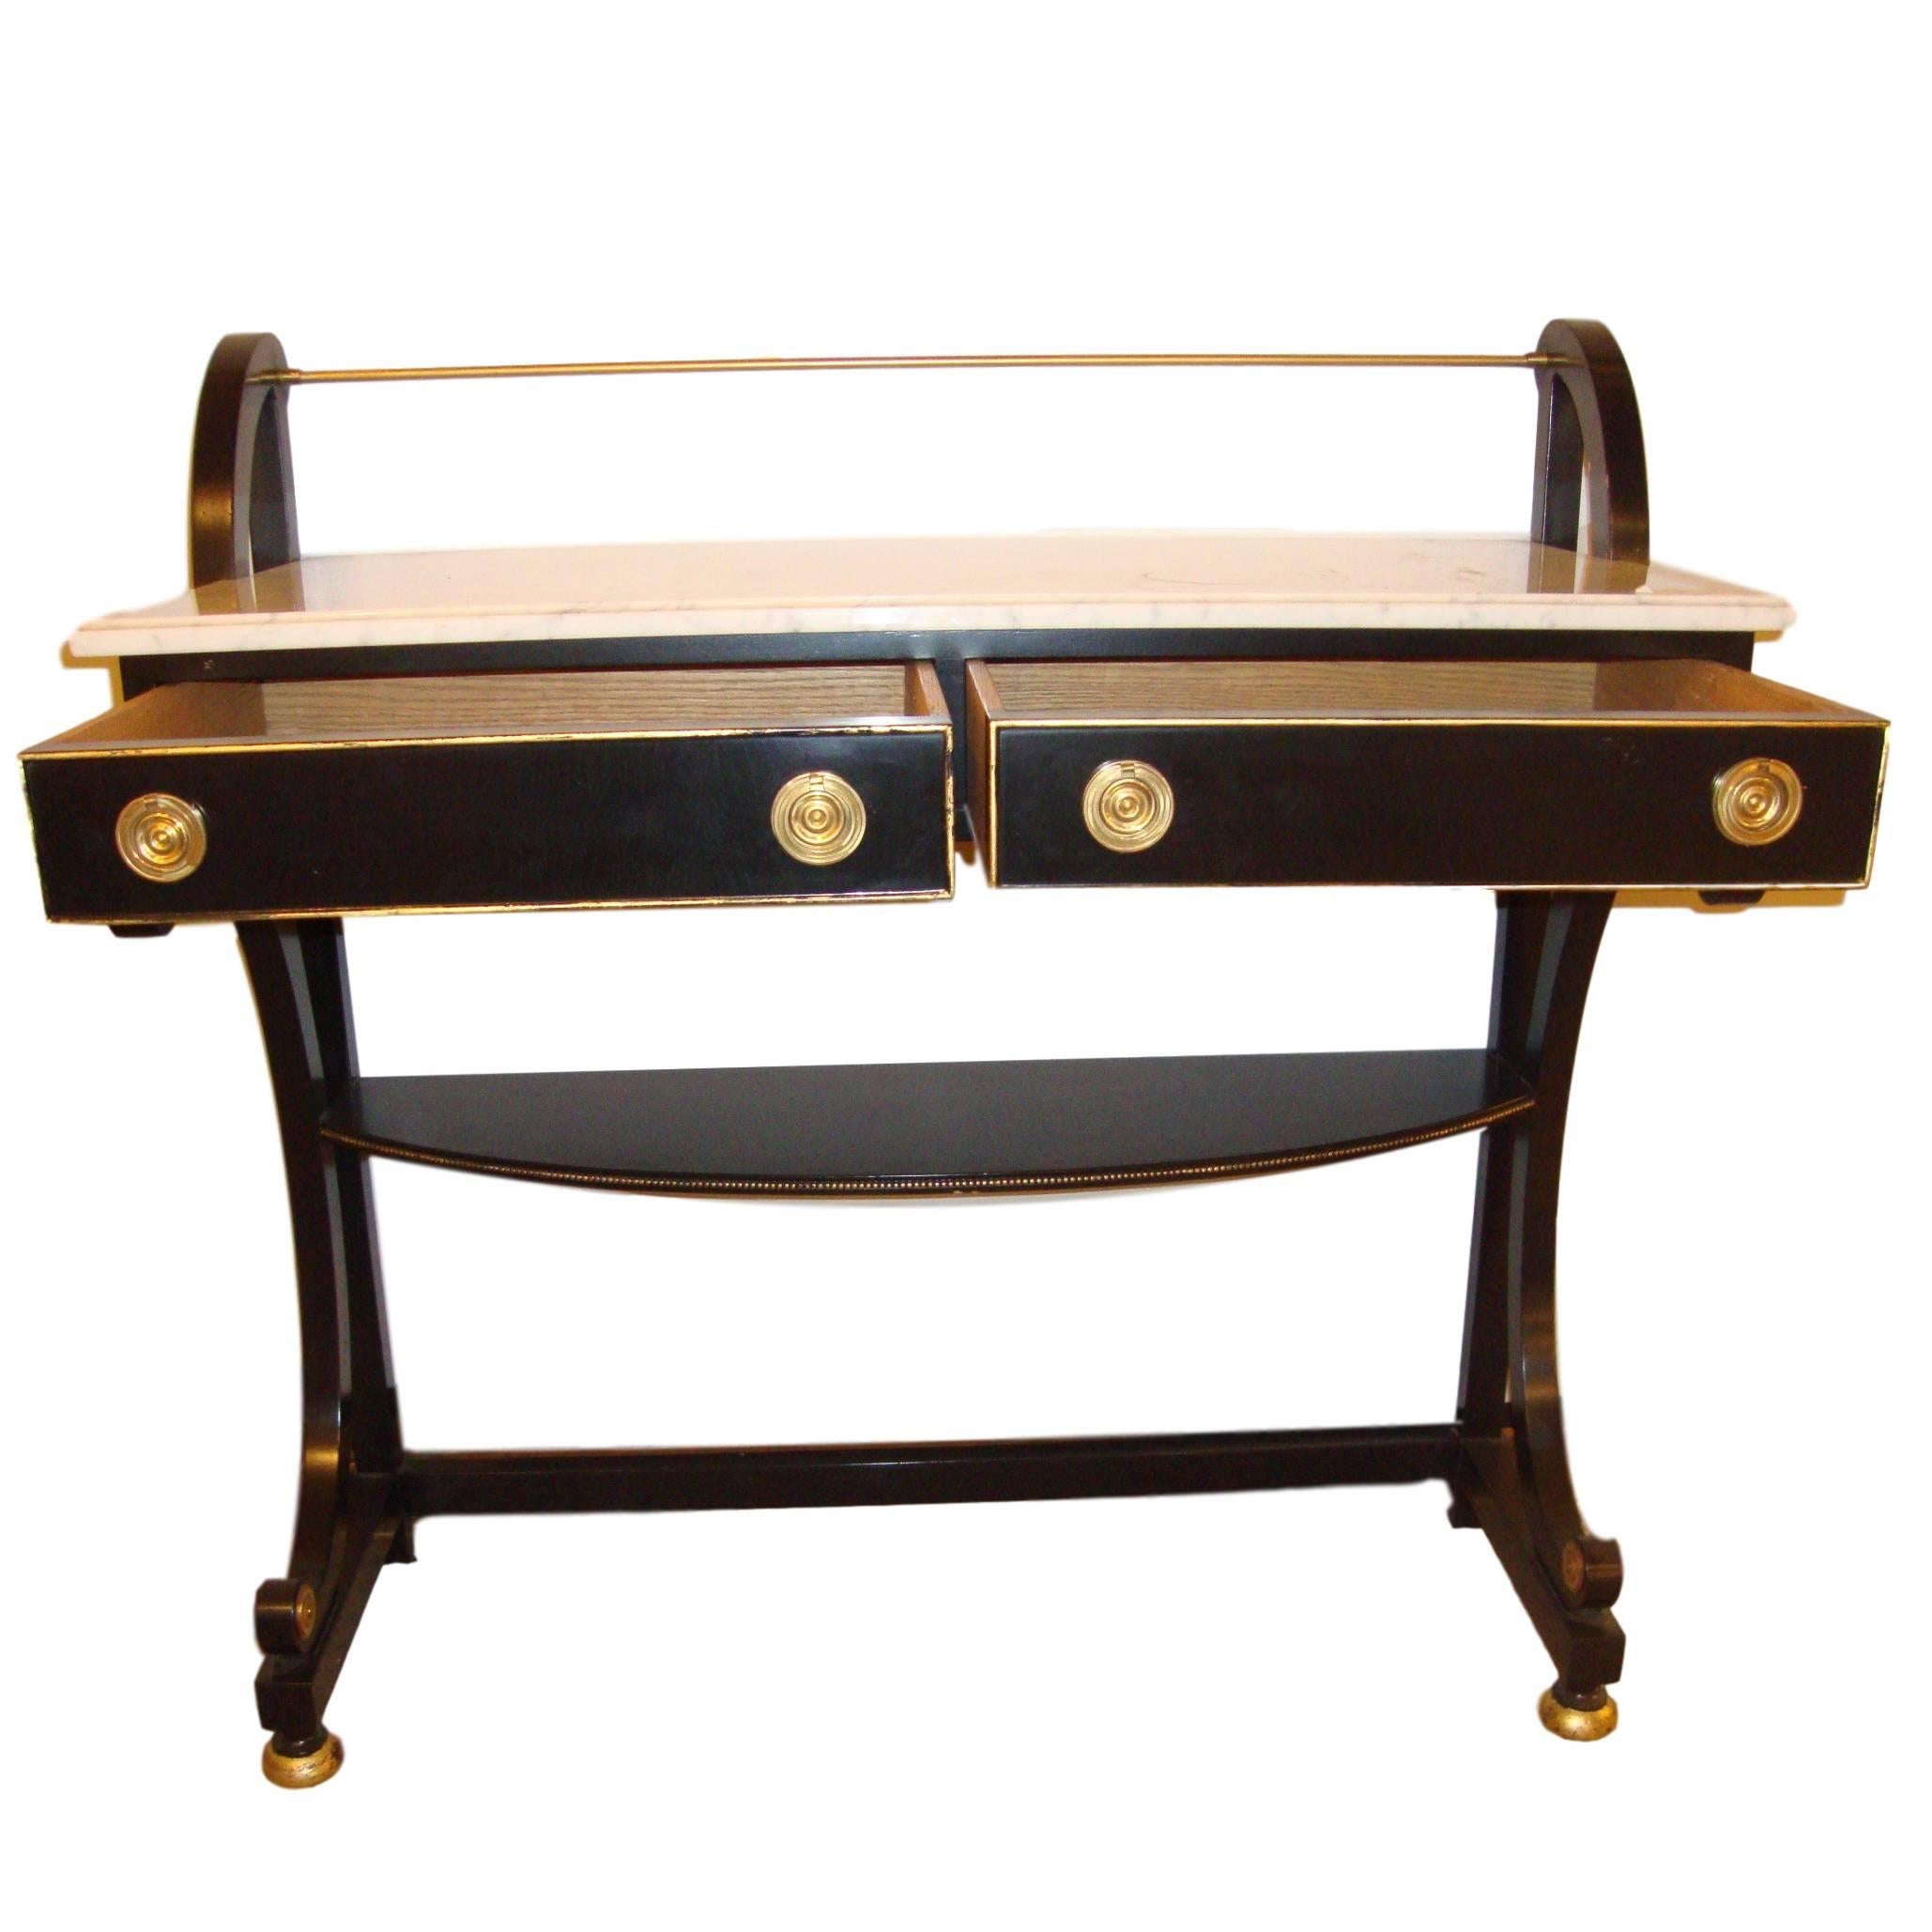 Ebonized Marble-Top Server or Sofa Table Attributed to Jansen